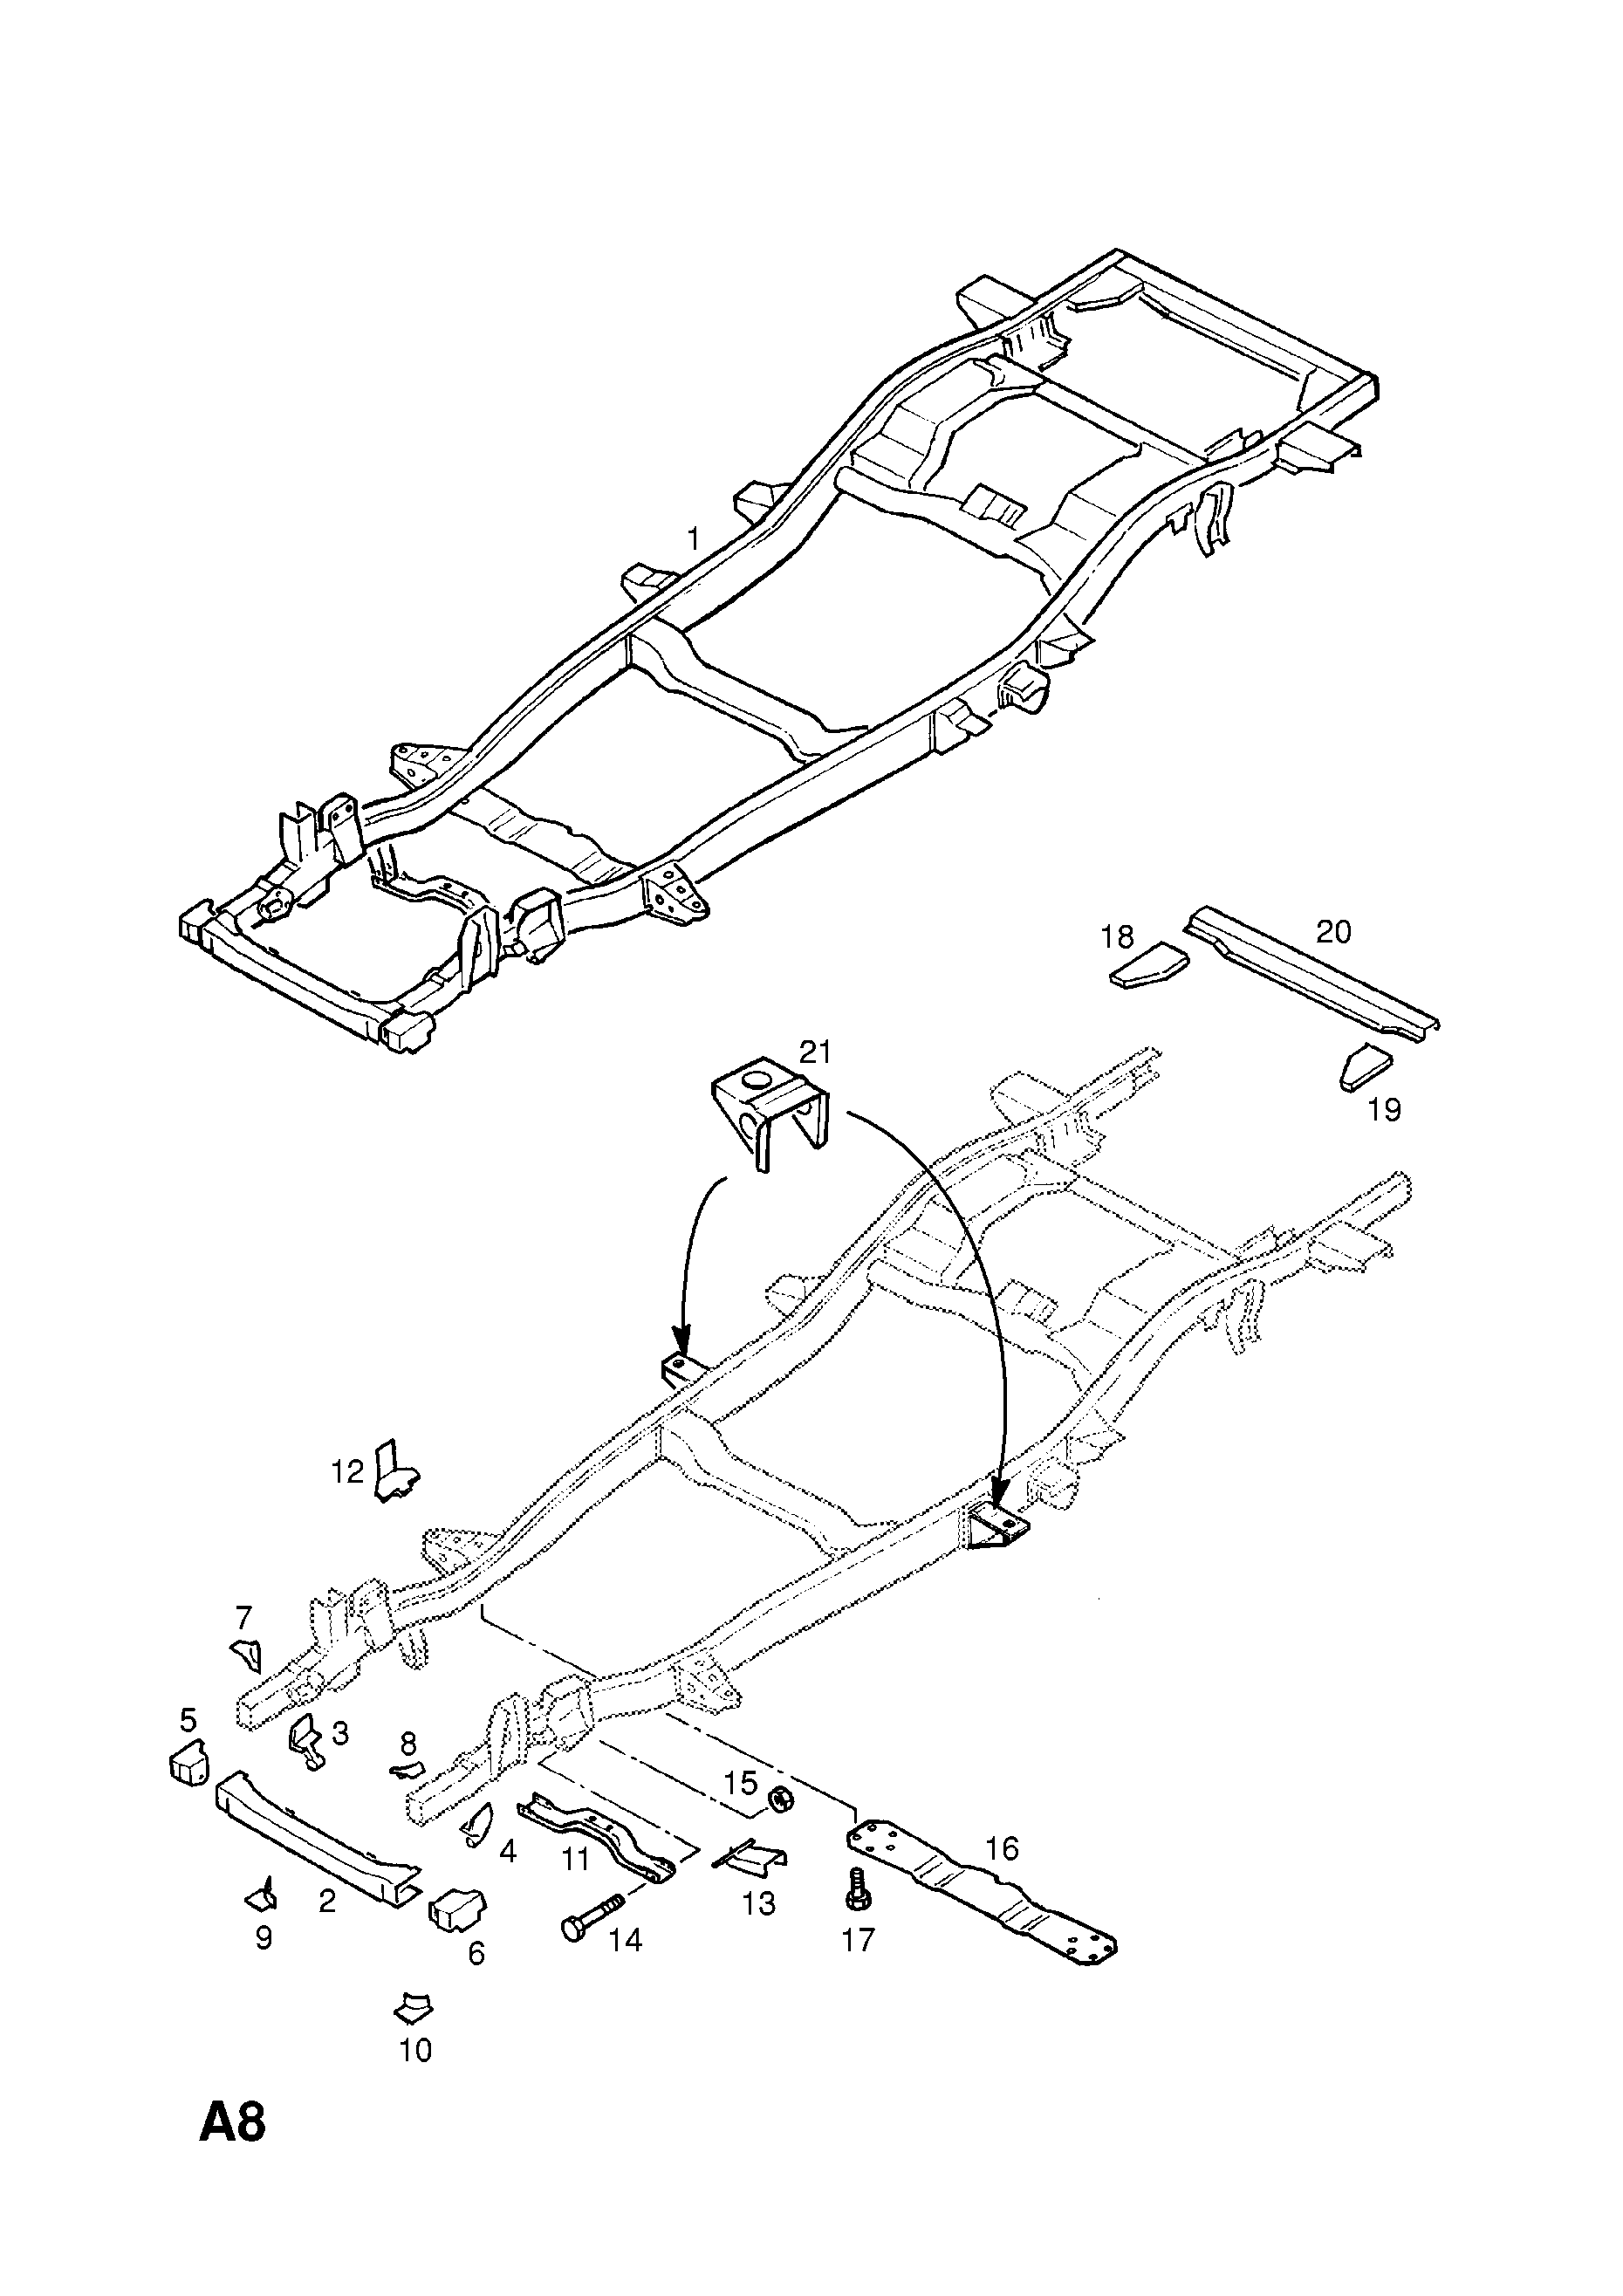 CHASSIS FRAME <small><i>[4 DOOR GF]</i></small>